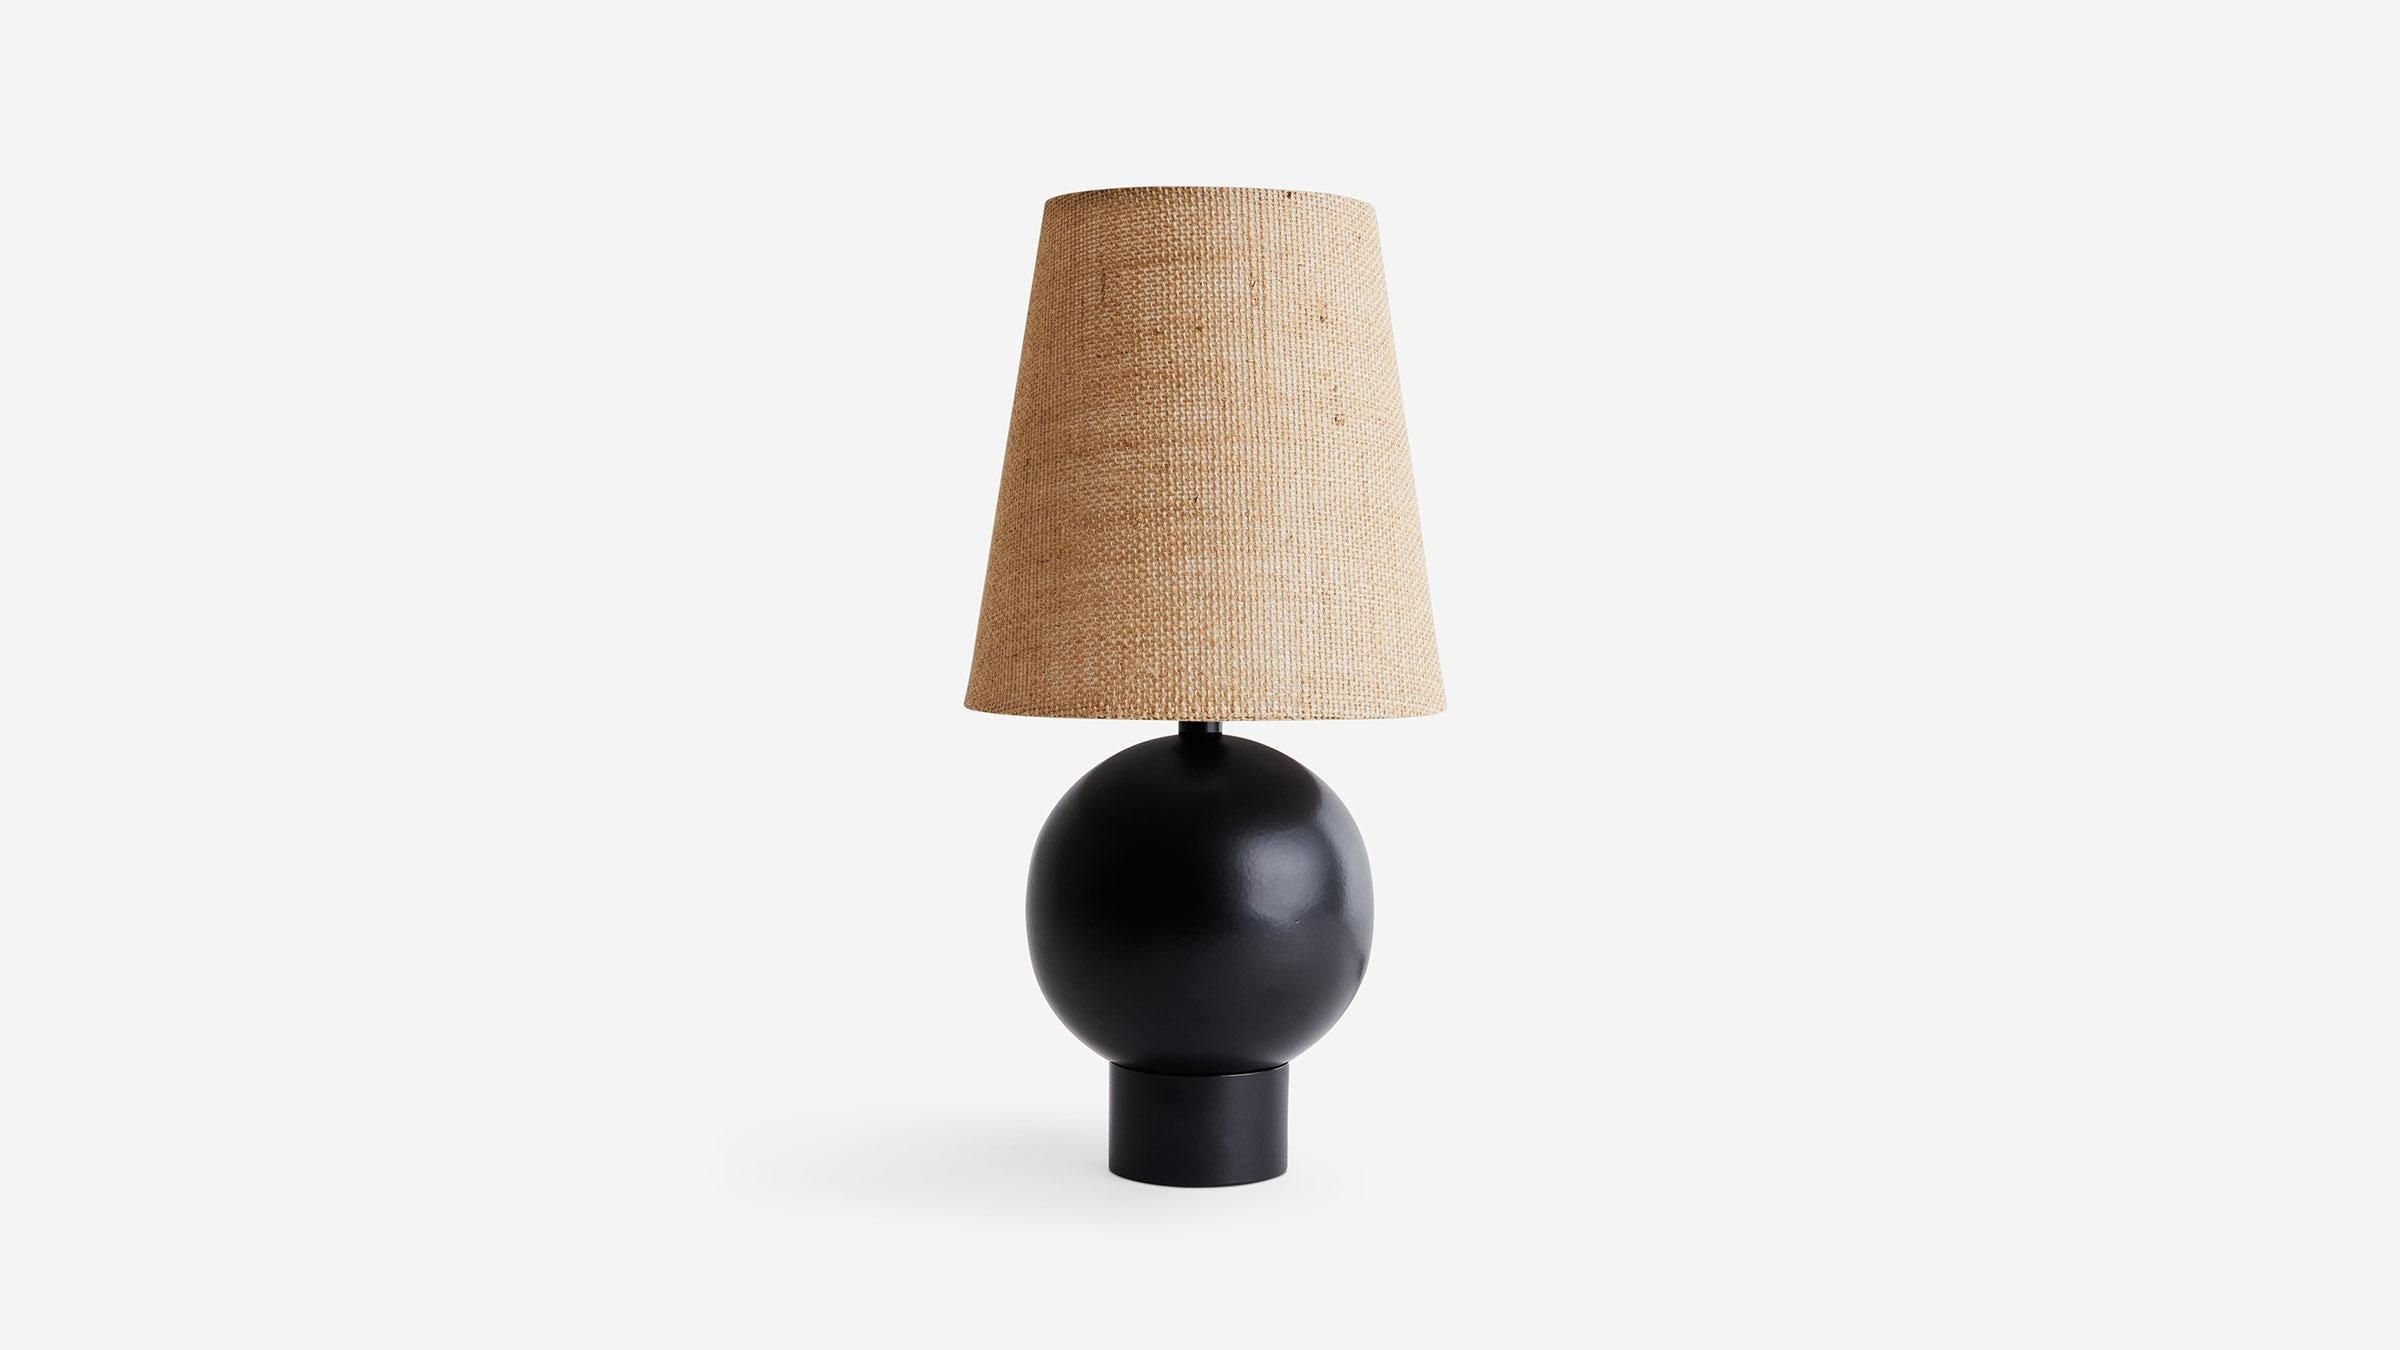 BOLE TABLE LAMP brings the sturdy globe of the BOLE collection down to eye level. With its confident proportions this table lamp sits comfortably as the center of attention or tucks away to illuminate the unexpected. UL, cUL, CE Listed. Damp Rated.

